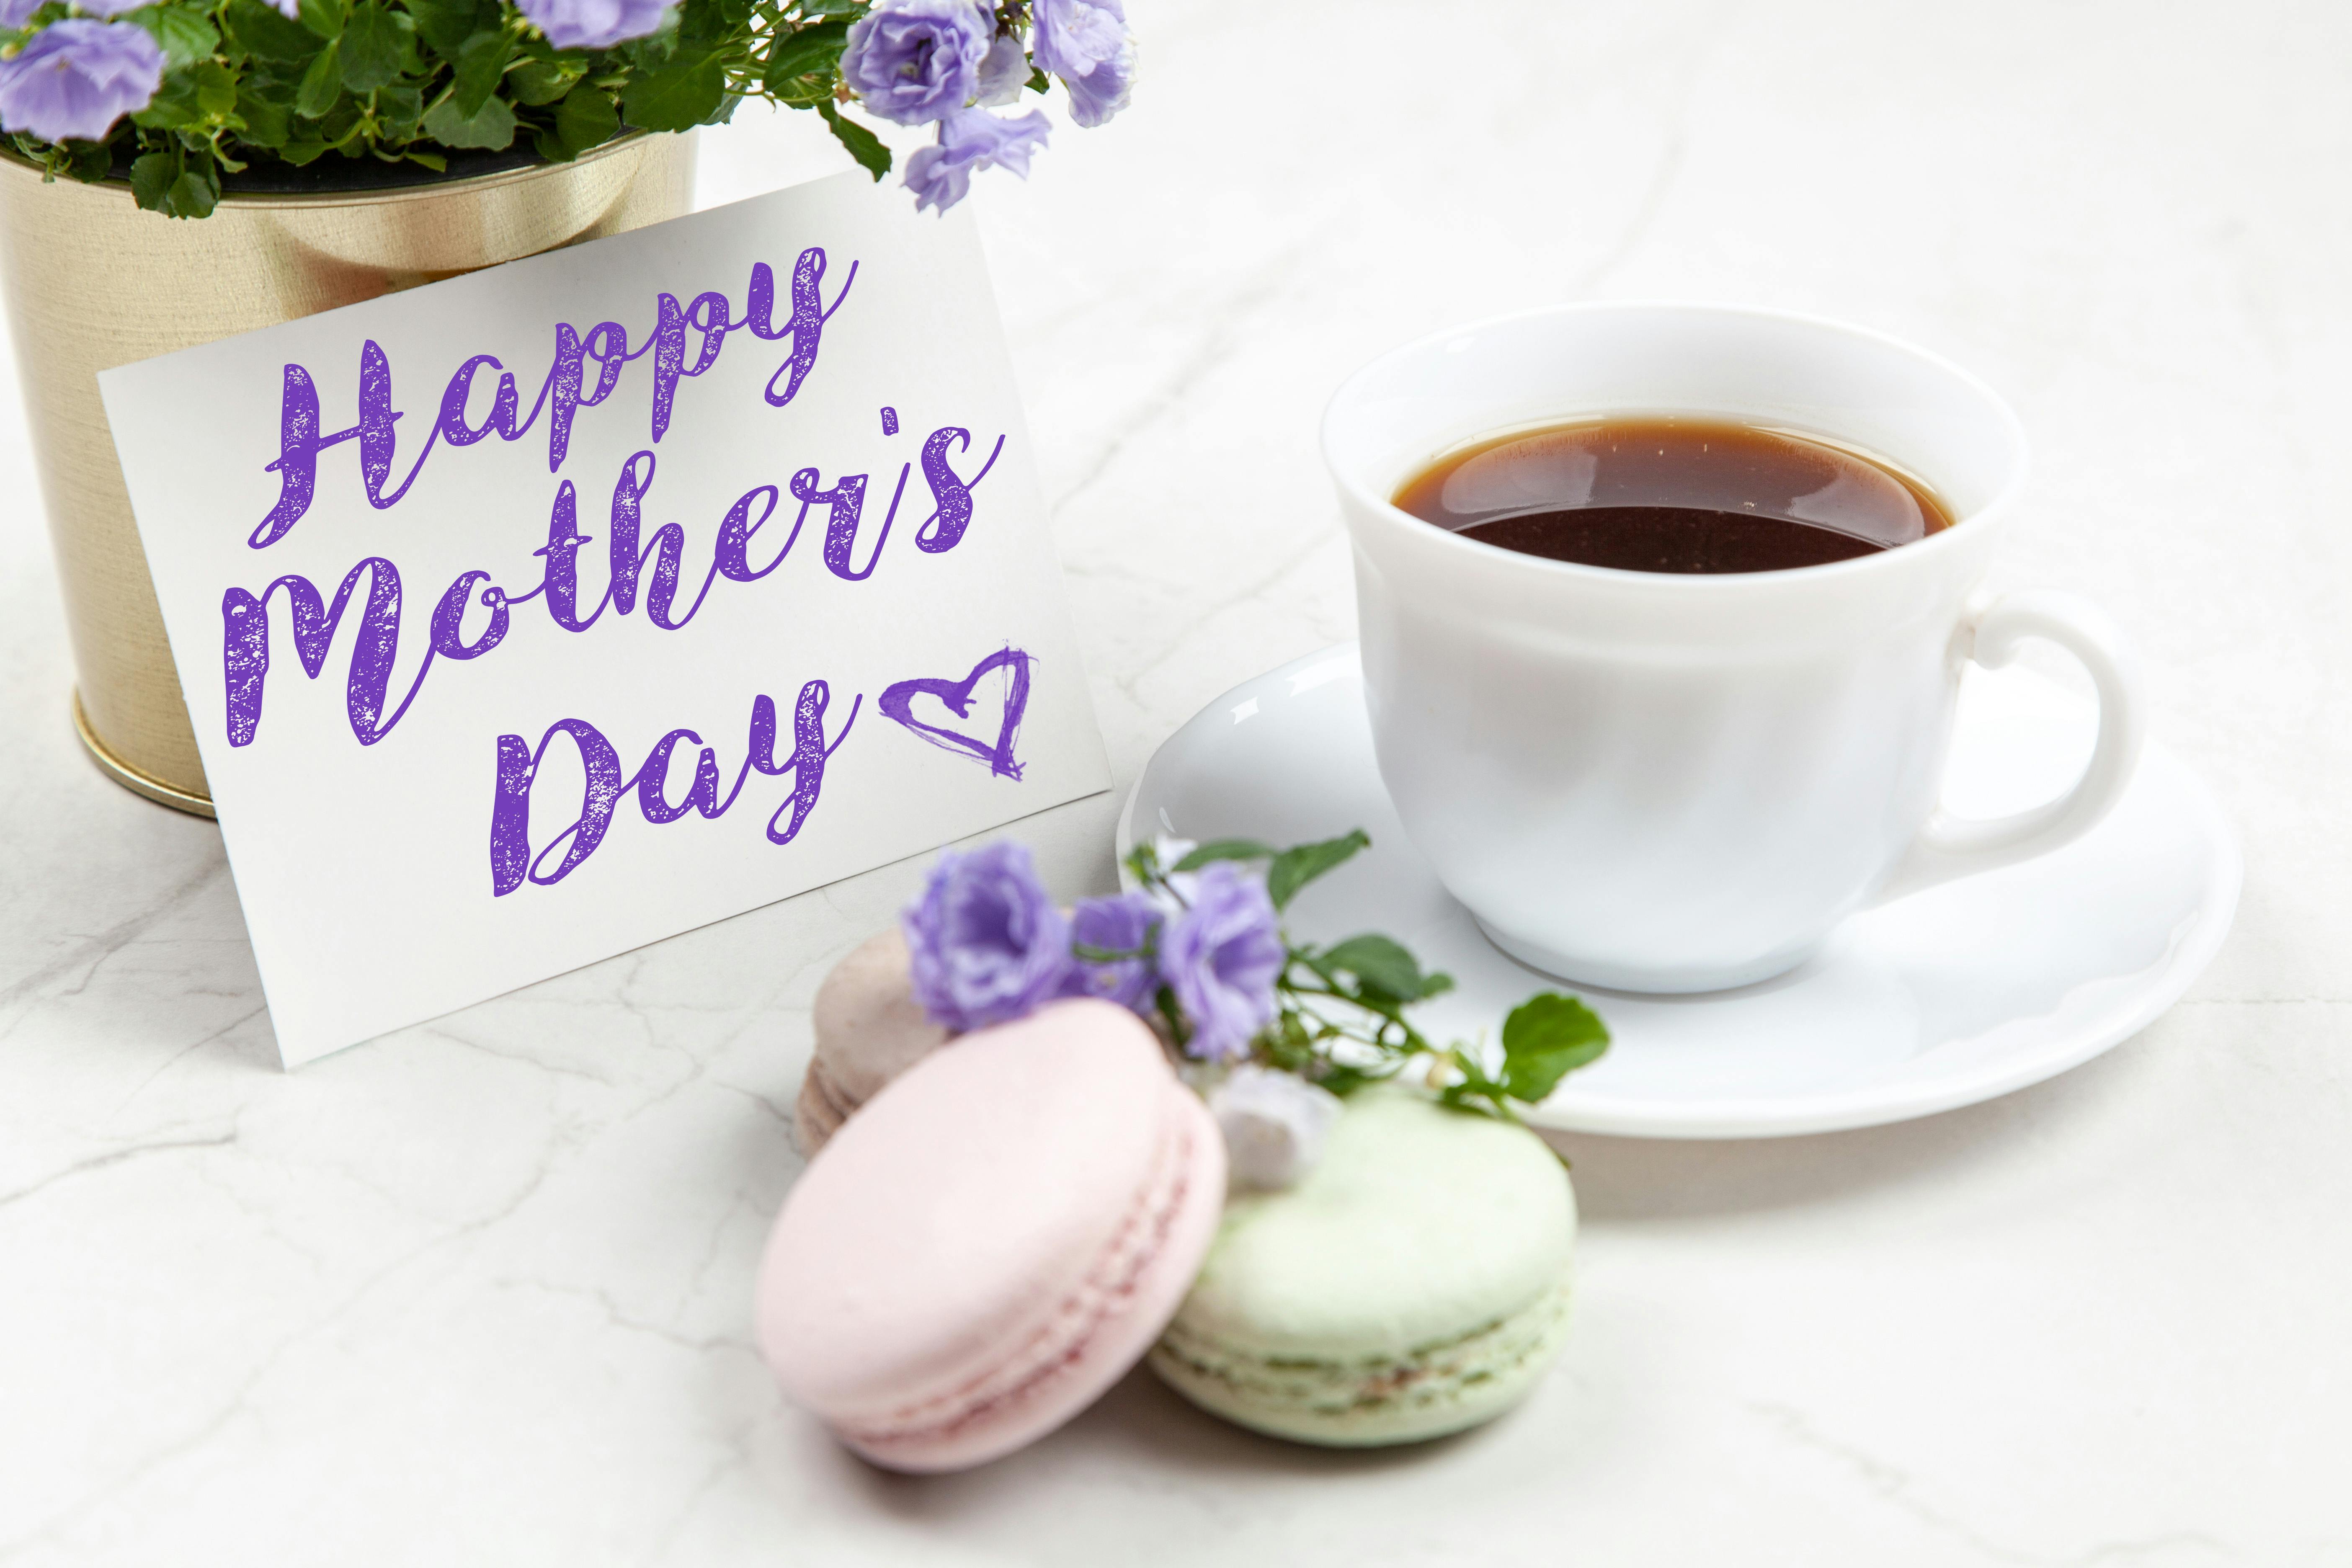 A Mother's Day card next to a cup of tea and macarons | Source: Pexels